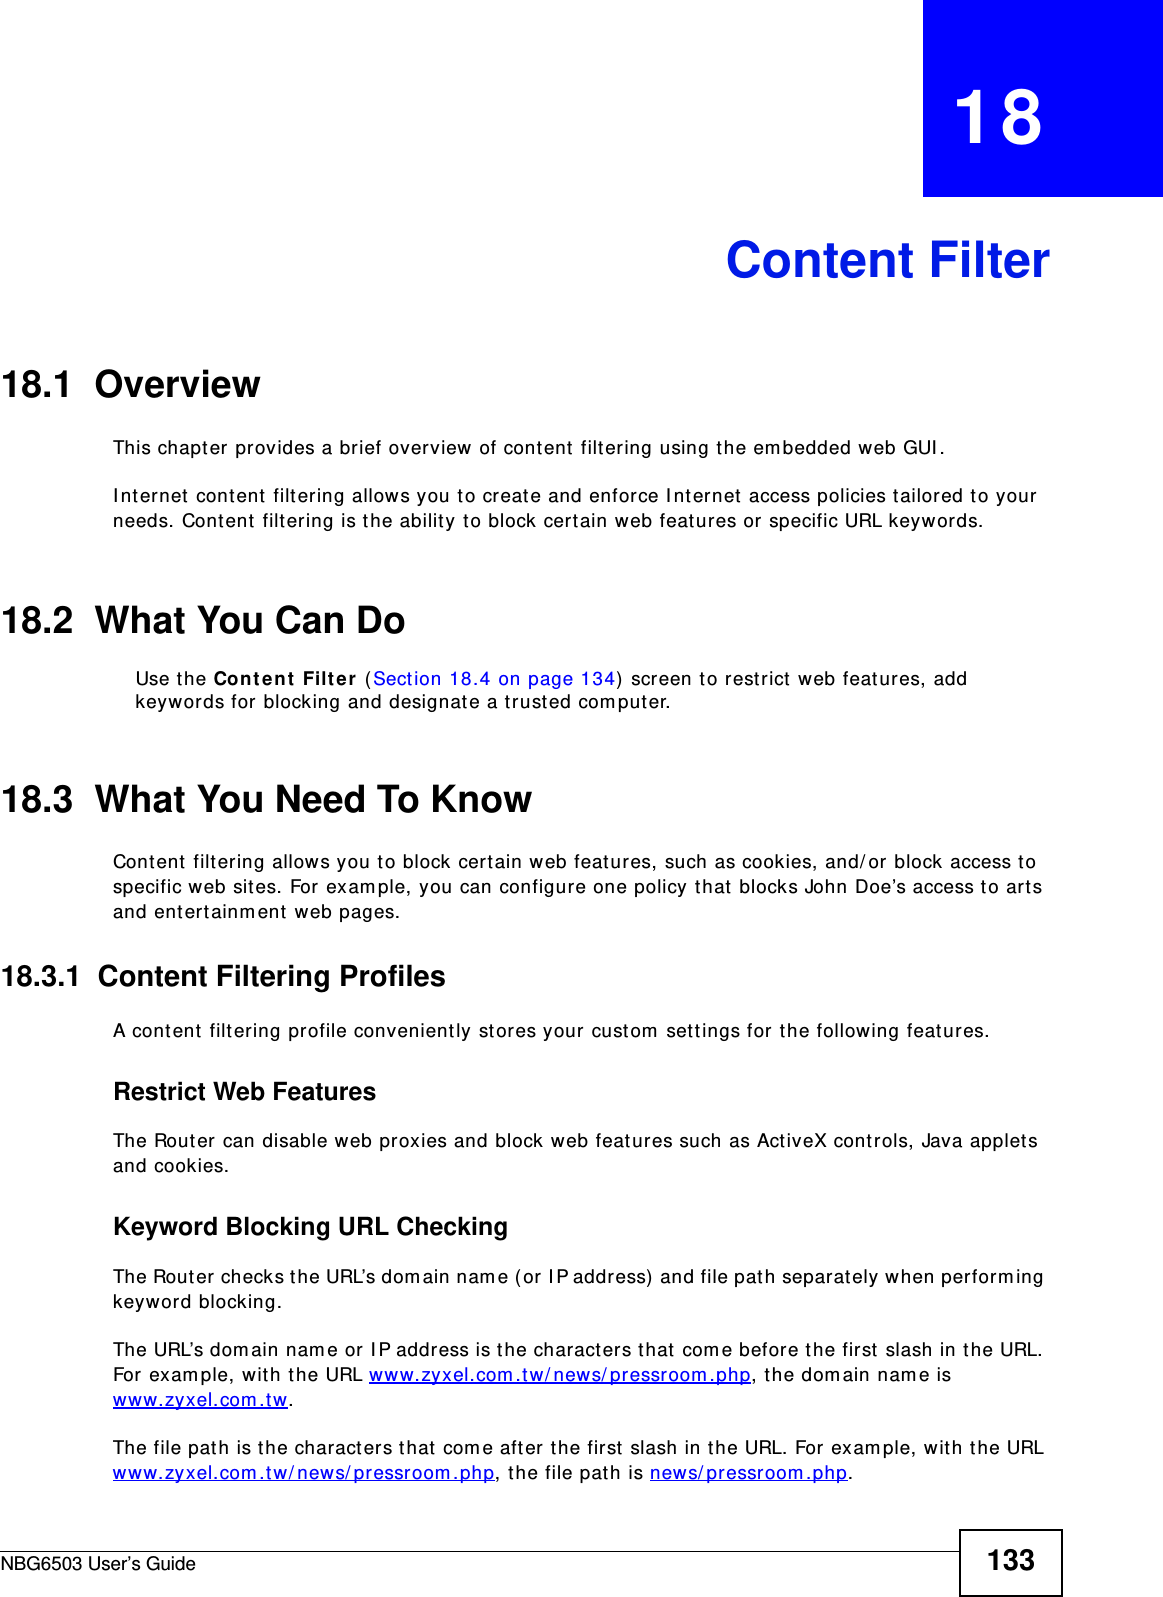 NBG6503 User’s Guide 133CHAPTER   18Content Filter18.1  OverviewThis chapter provides a brief overview of content filtering using the embedded web GUI.Internet content filtering allows you to create and enforce Internet access policies tailored to your needs. Content filtering is the ability to block certain web features or specific URL keywords.18.2  What You Can DoUse the Content Filter (Section 18.4 on page 134) screen to restrict web features, add keywords for blocking and designate a trusted computer.18.3  What You Need To KnowContent filtering allows you to block certain web features, such as cookies, and/or block access to specific web sites. For example, you can configure one policy that blocks John Doe’s access to arts and entertainment web pages.18.3.1  Content Filtering ProfilesA content filtering profile conveniently stores your custom settings for the following features.Restrict Web FeaturesThe Router can disable web proxies and block web features such as ActiveX controls, Java applets and cookies.Keyword Blocking URL CheckingThe Router checks the URL’s domain name (or IP address) and file path separately when performing keyword blocking. The URL’s domain name or IP address is the characters that come before the first slash in the URL. For example, with the URL www.zyxel.com.tw/news/pressroom.php, the domain name is www.zyxel.com.tw.The file path is the characters that come after the first slash in the URL. For example, with the URL www.zyxel.com.tw/news/pressroom.php, the file path is news/pressroom.php.